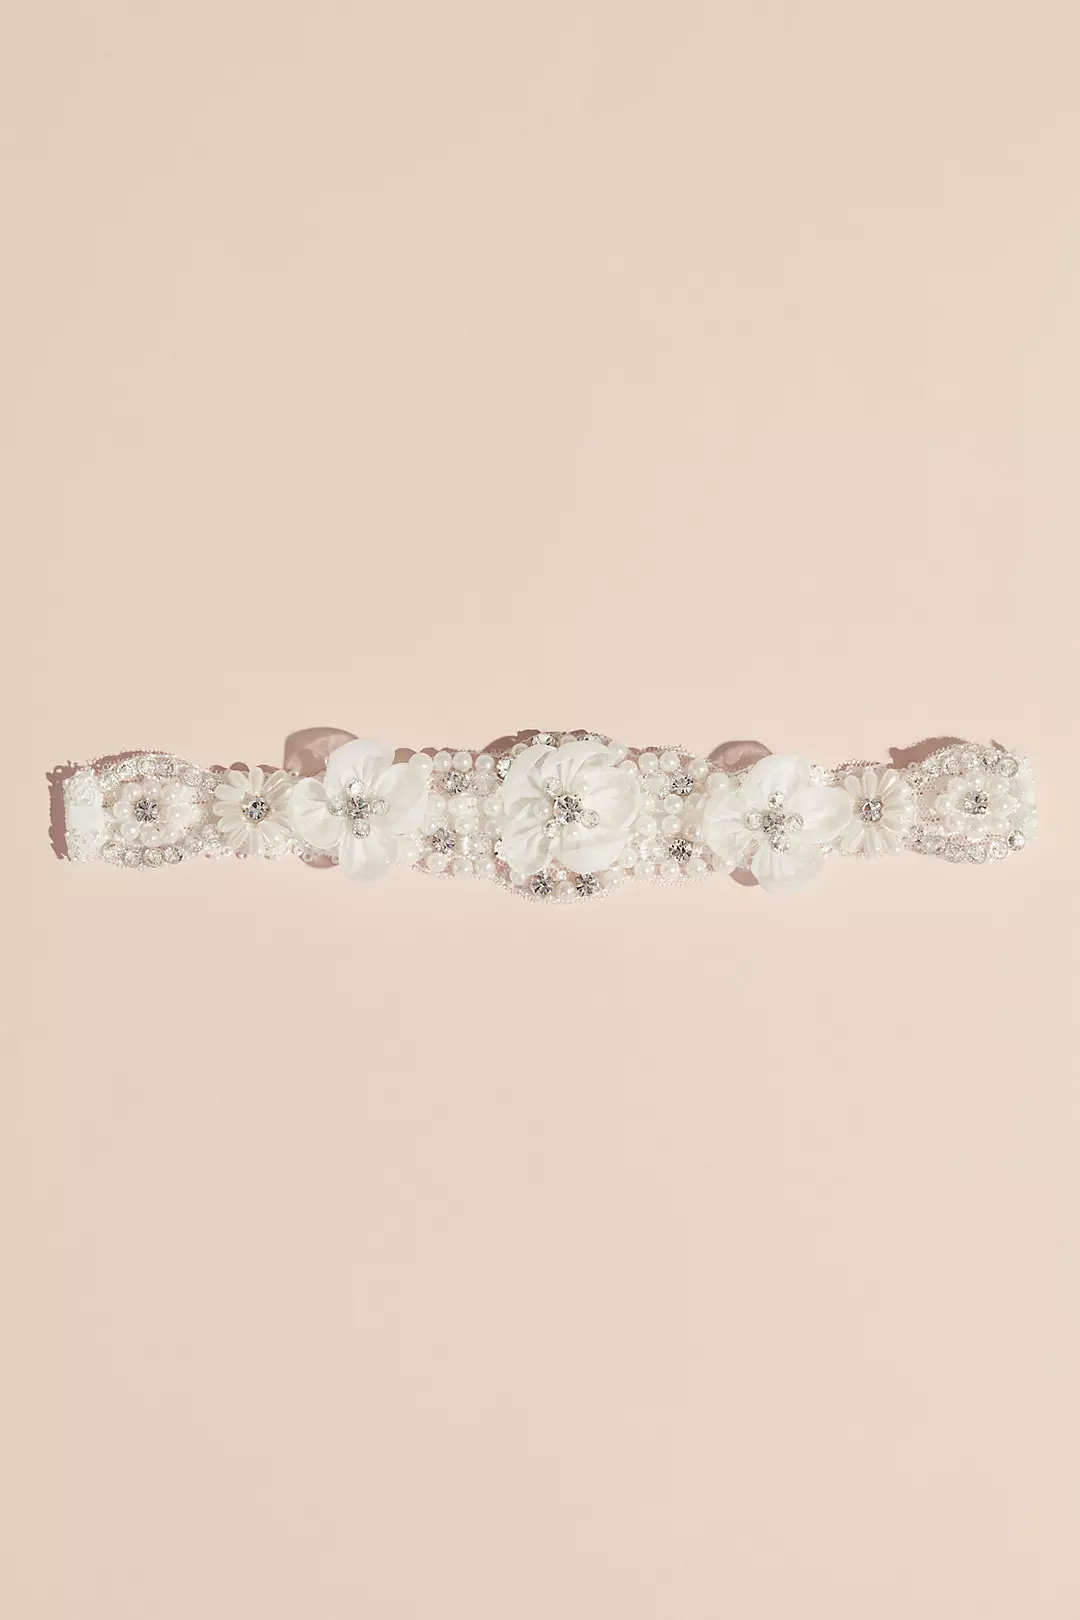 Pearl and Crystal Garter with Organza Flowers Image